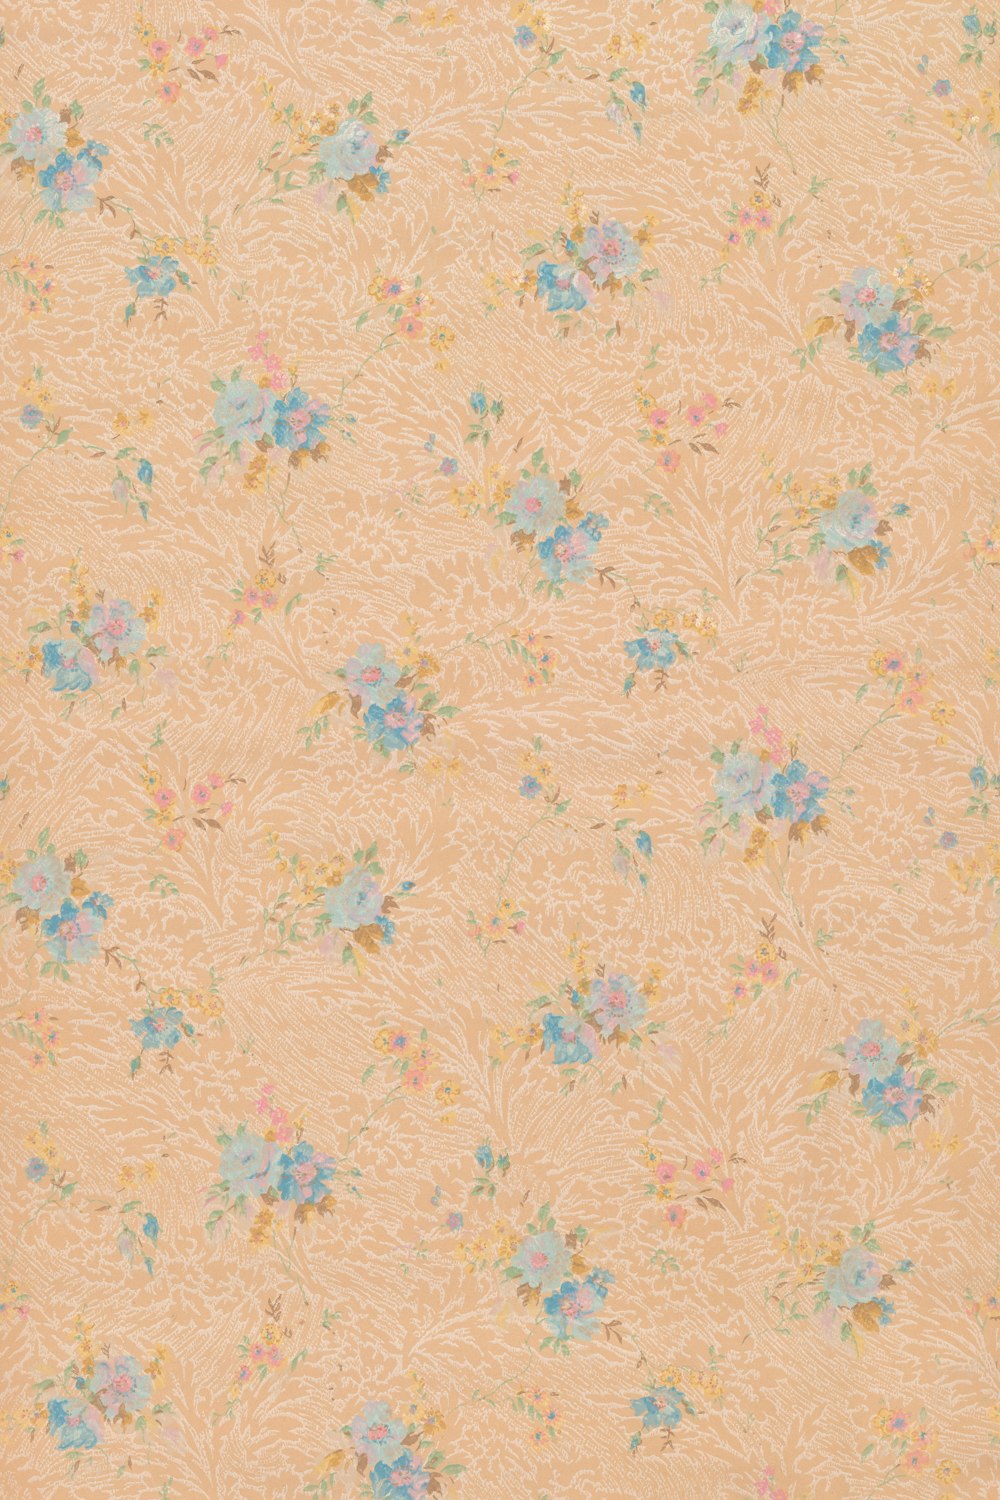 a floral wallpaper pattern with blue and pink flowers